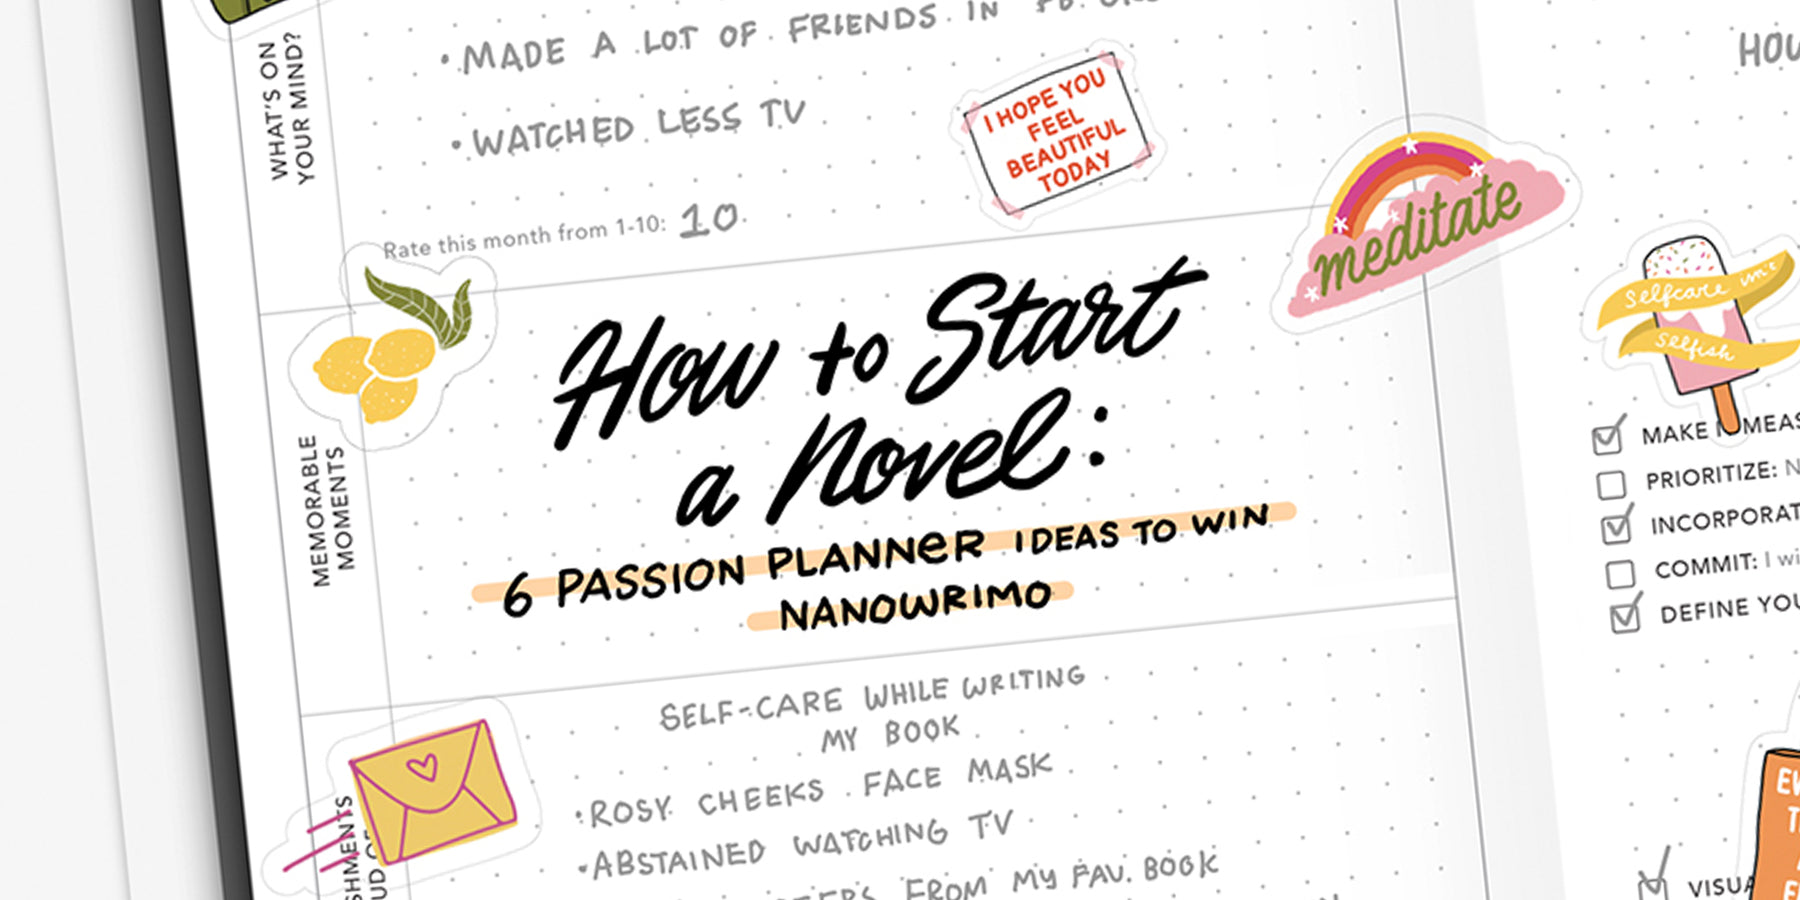 How to Start a Novel: 6 Passion Planner Ideas to Win NaNoWriMo